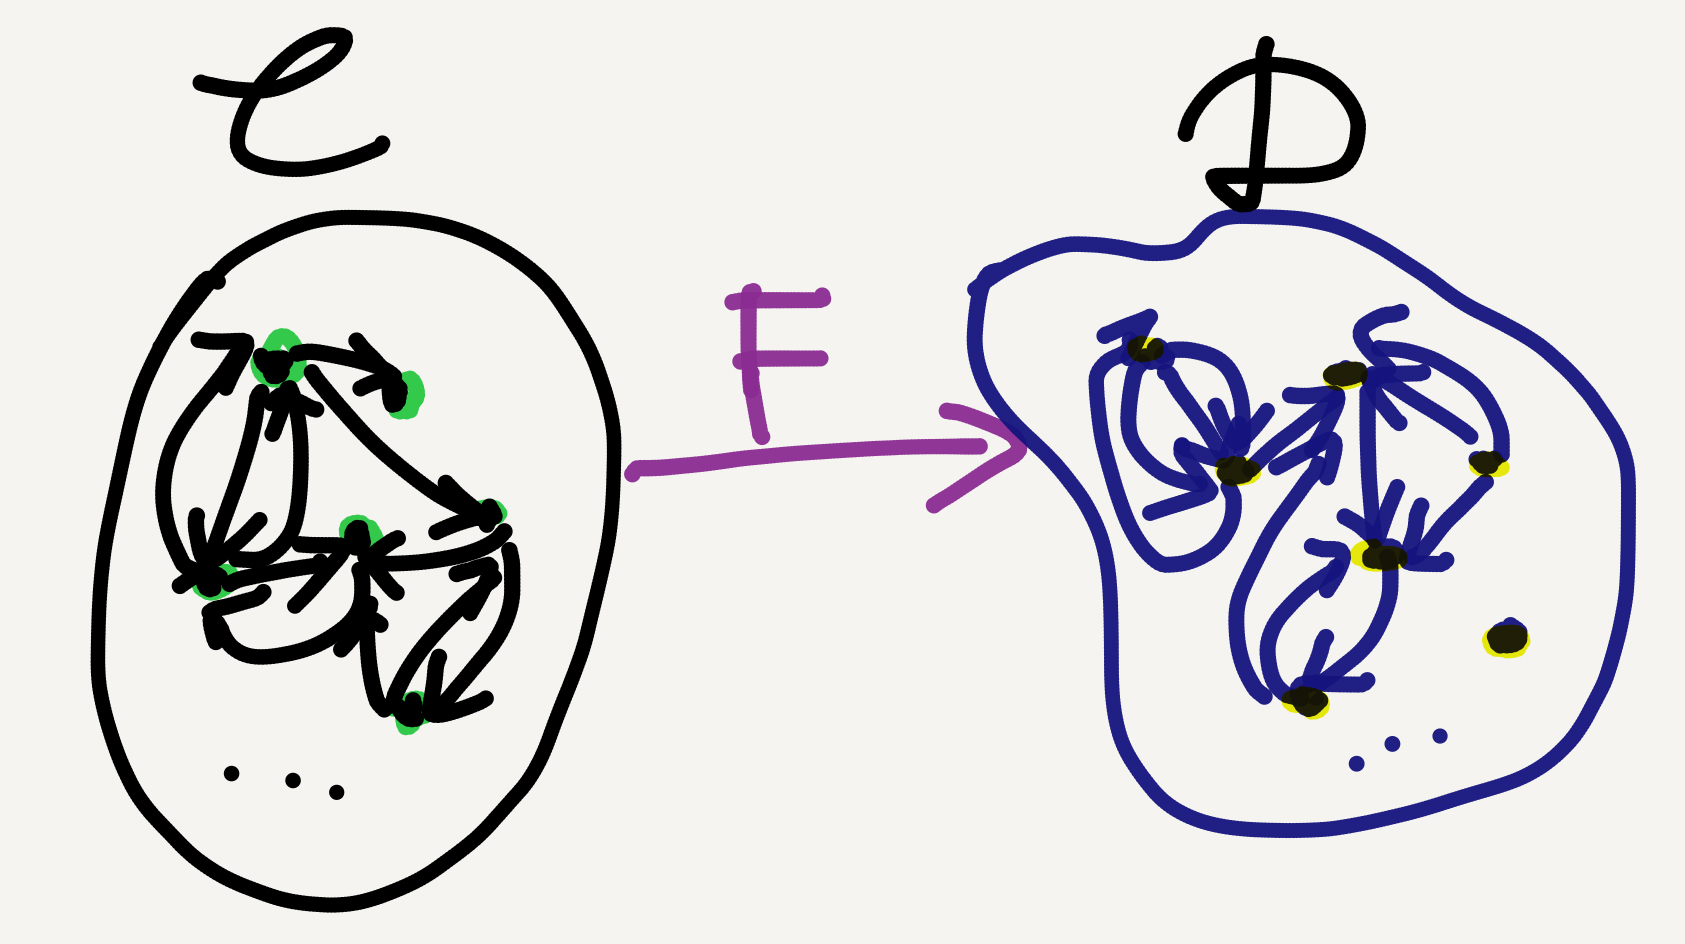 An illustration of a functor